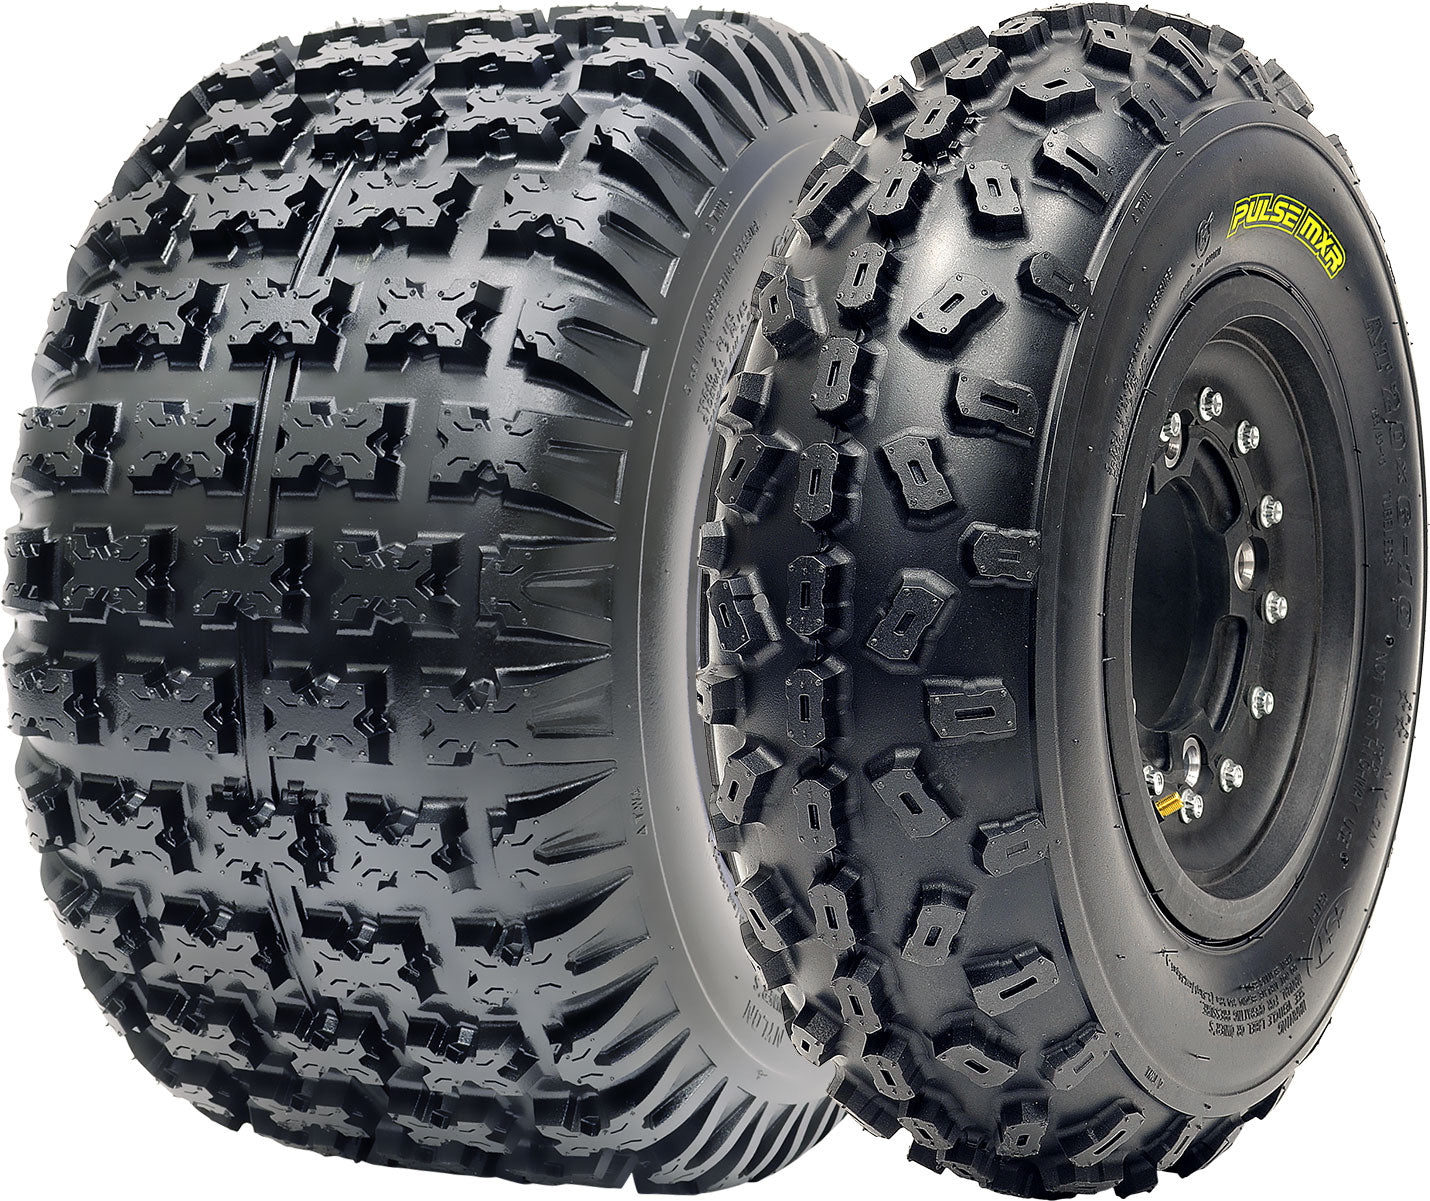 sxs tire and wheel packages